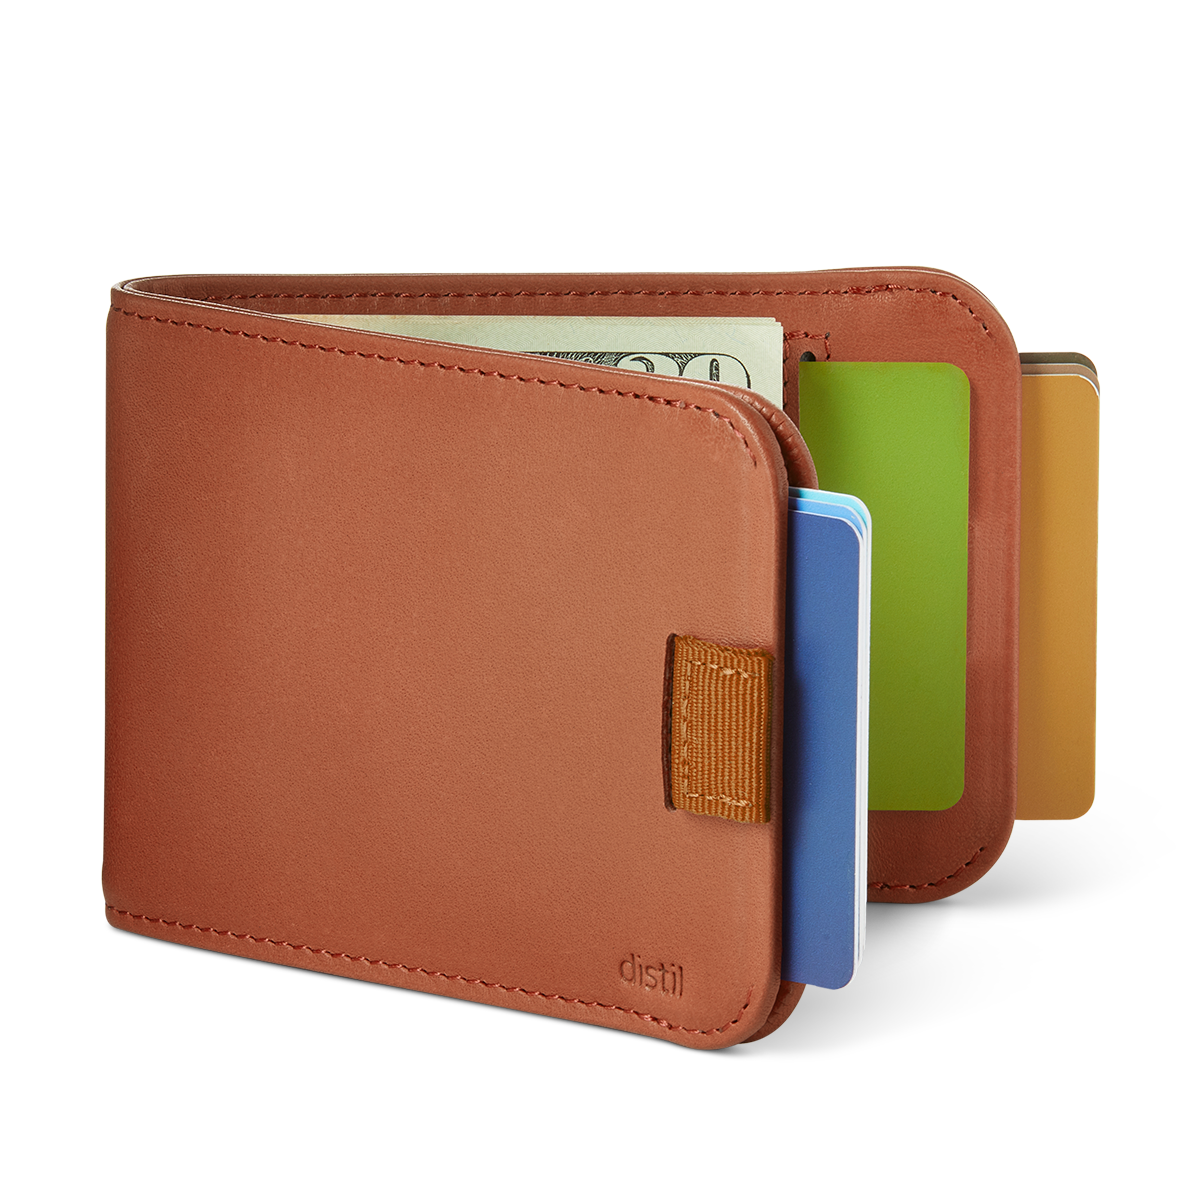 wally bifold 5.0 wallet in brown leather